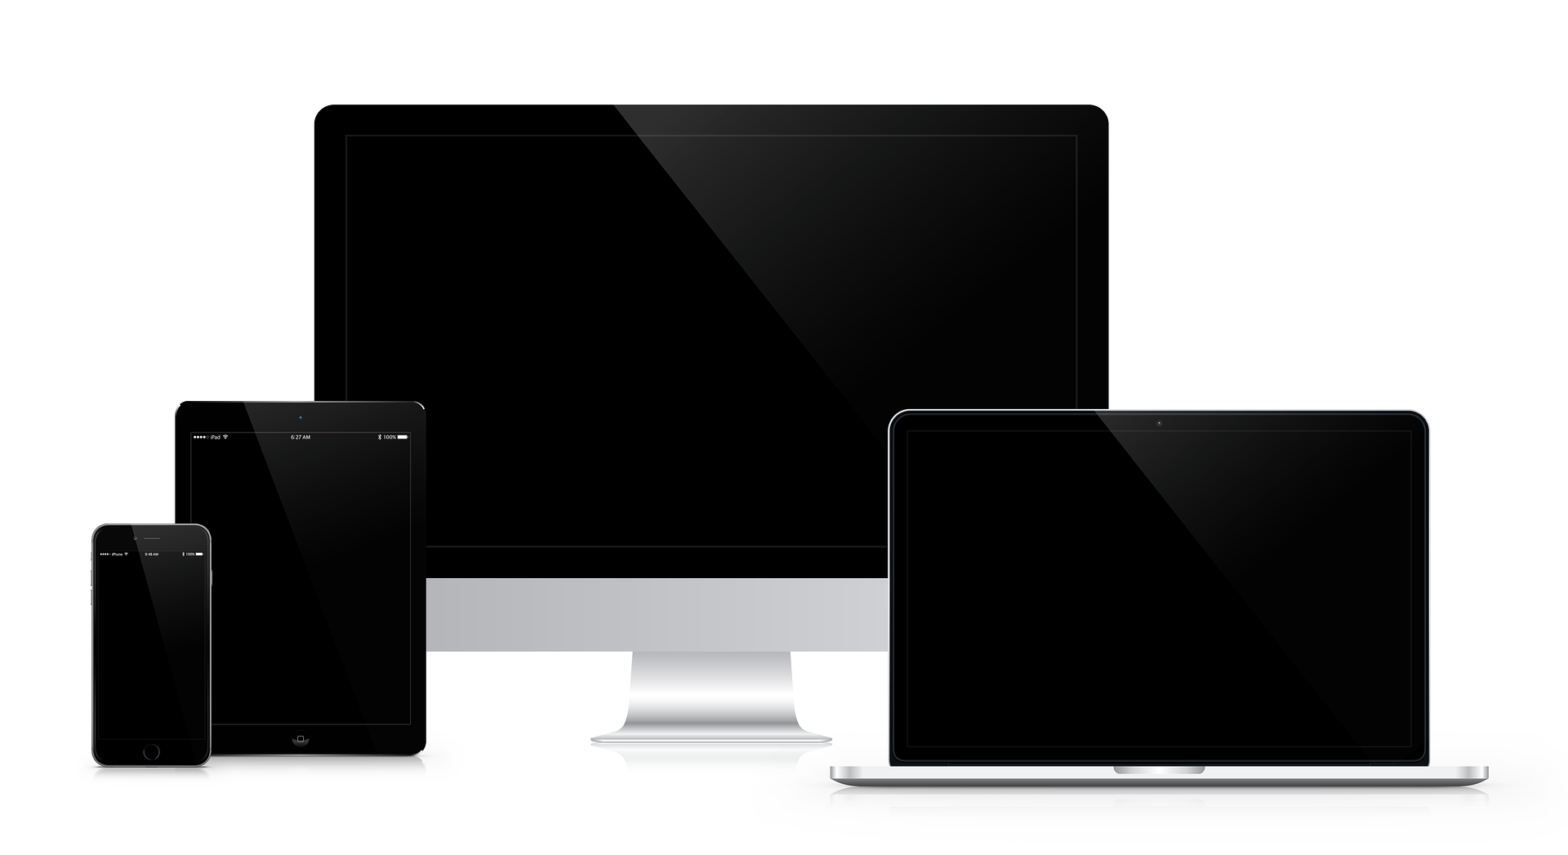 Responsive Design on Multiple Devices"